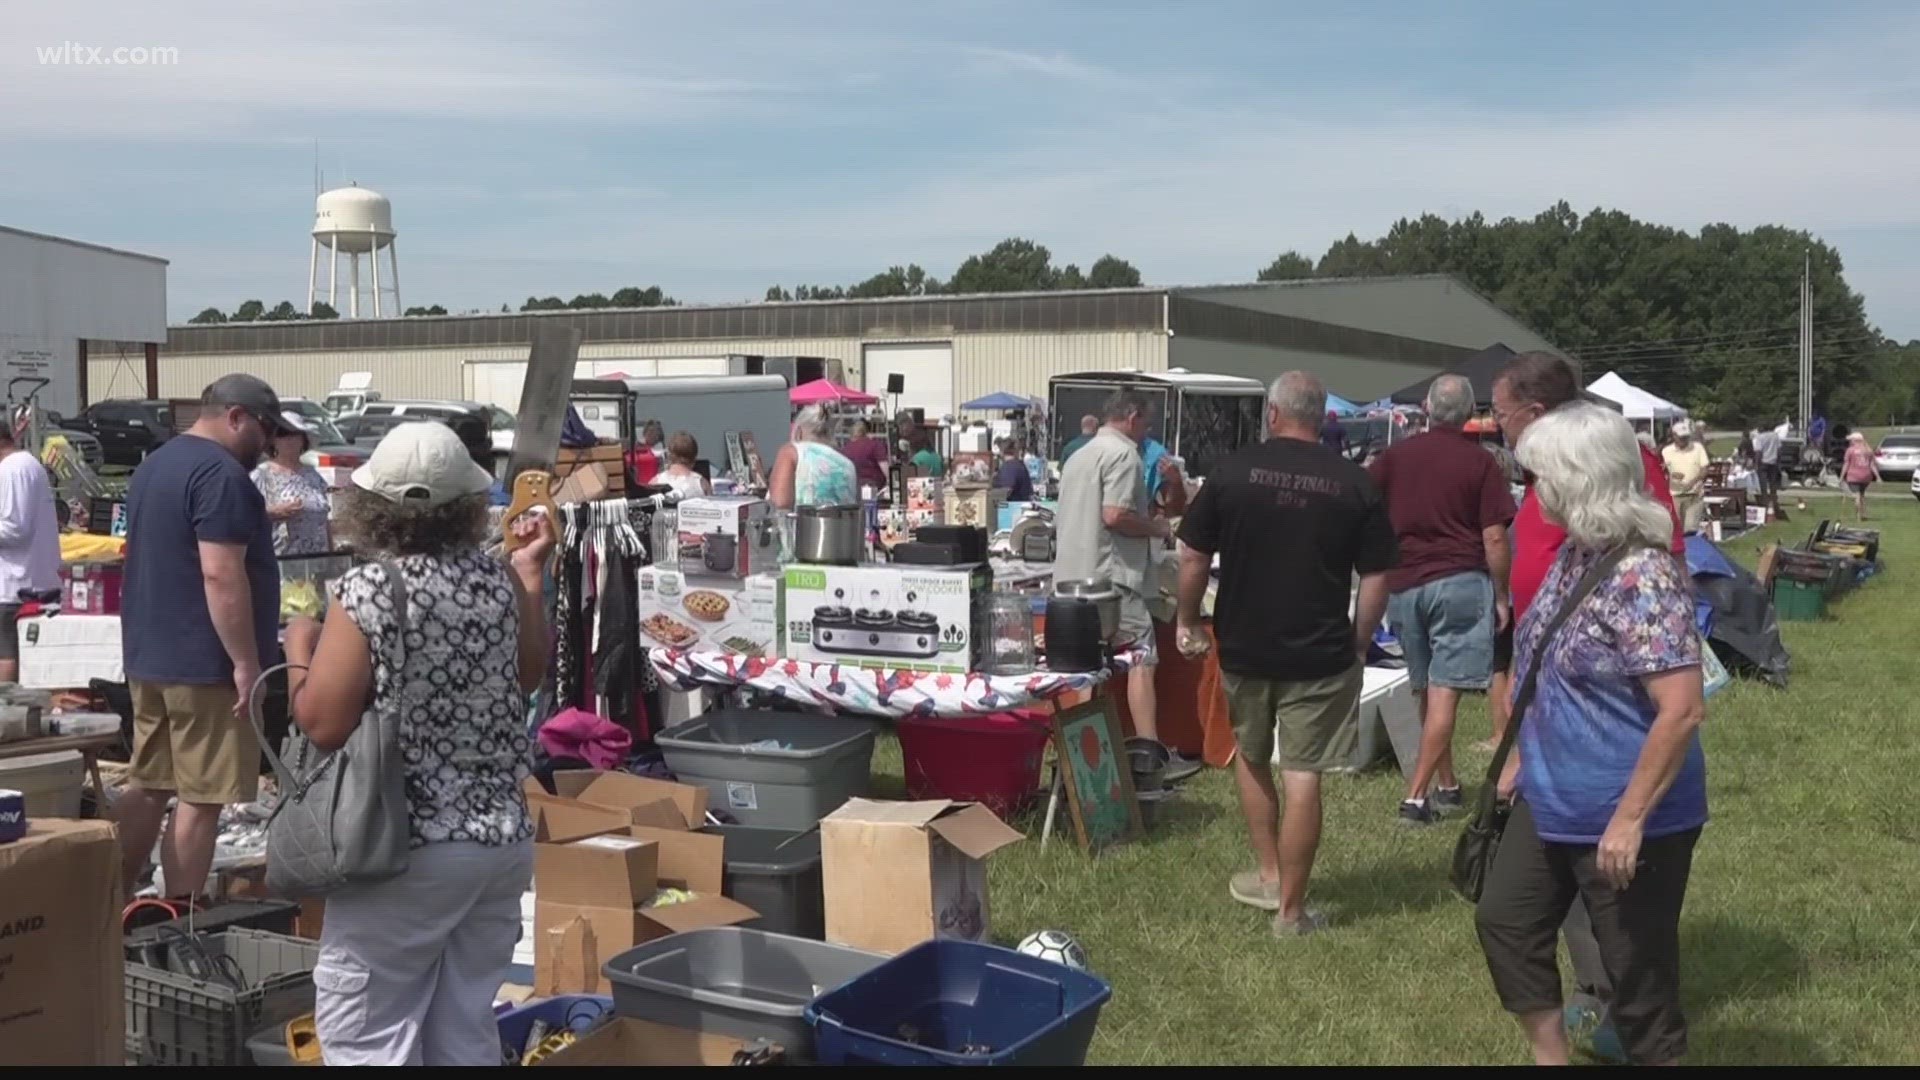 The large yard sale will go from 7am-3pm on Saturday.